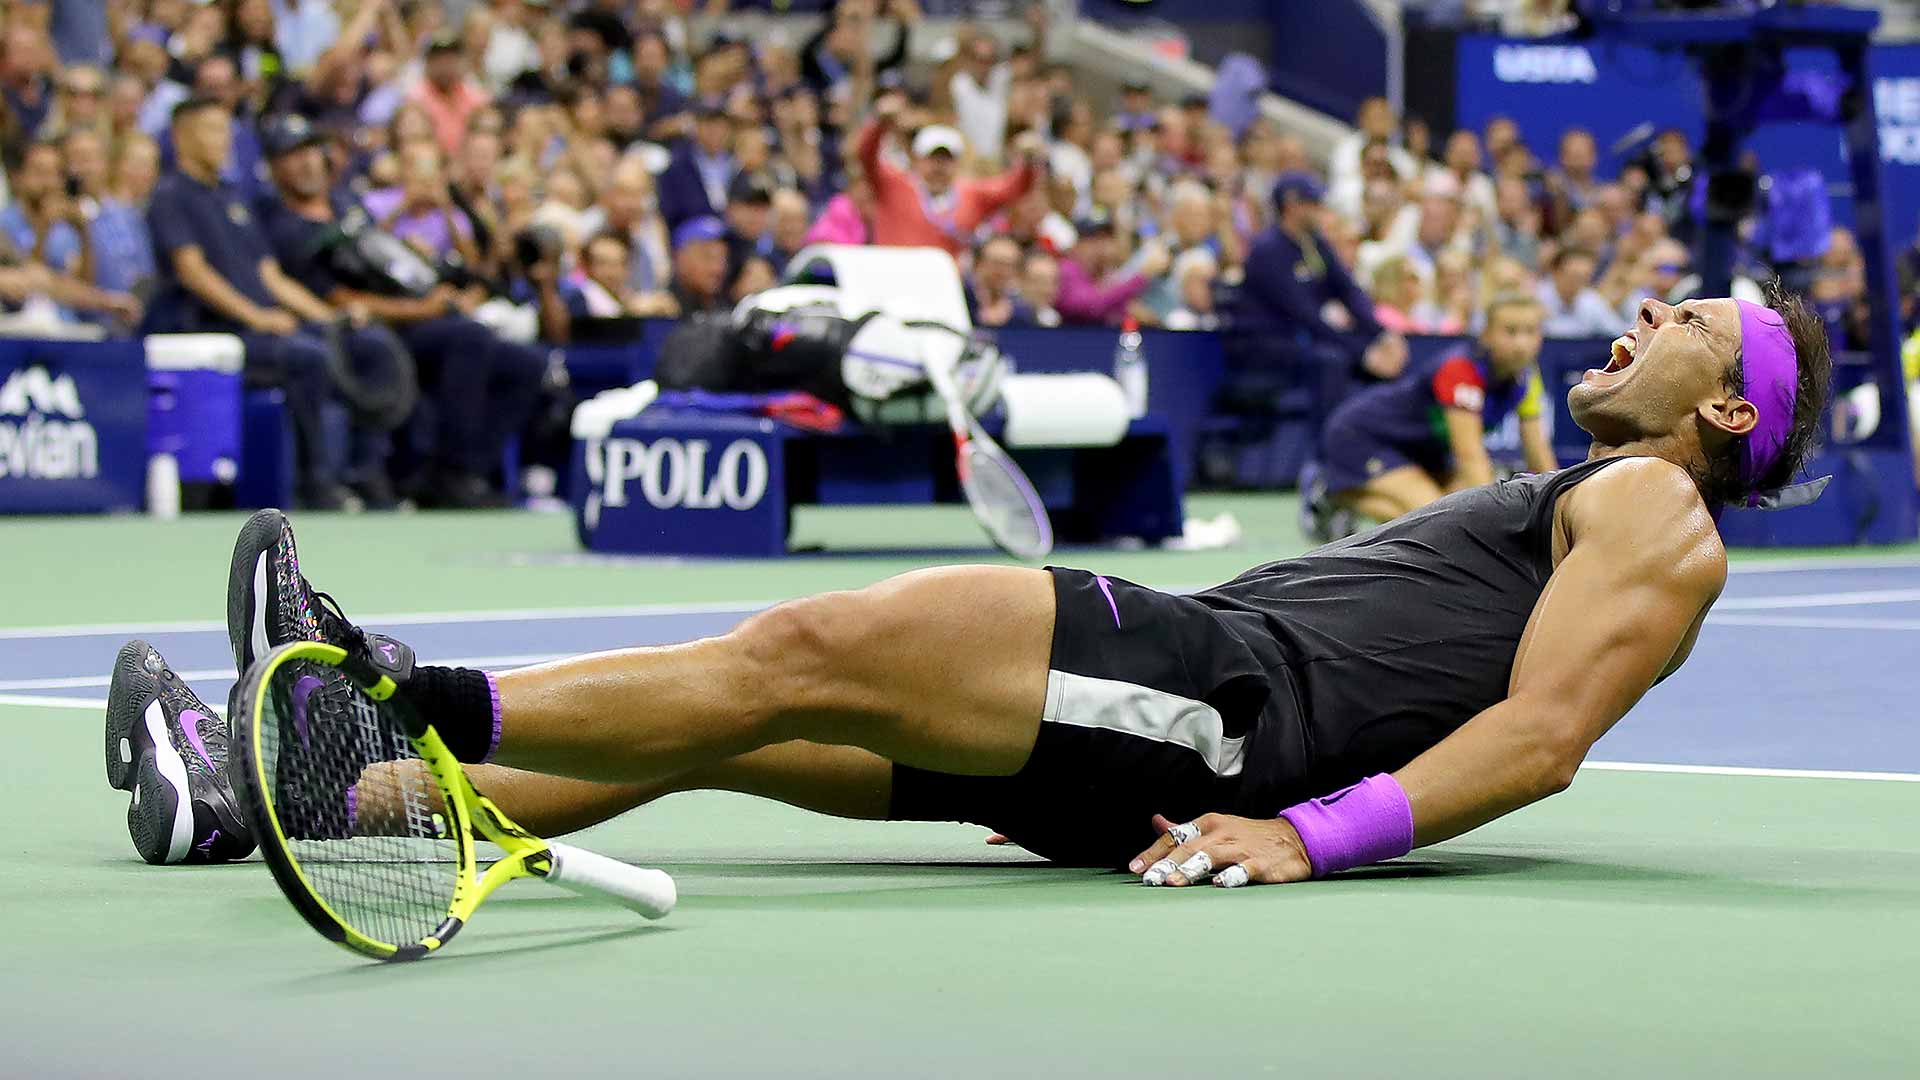 Rafael Nadal collapses after winning his fourth US Open title.